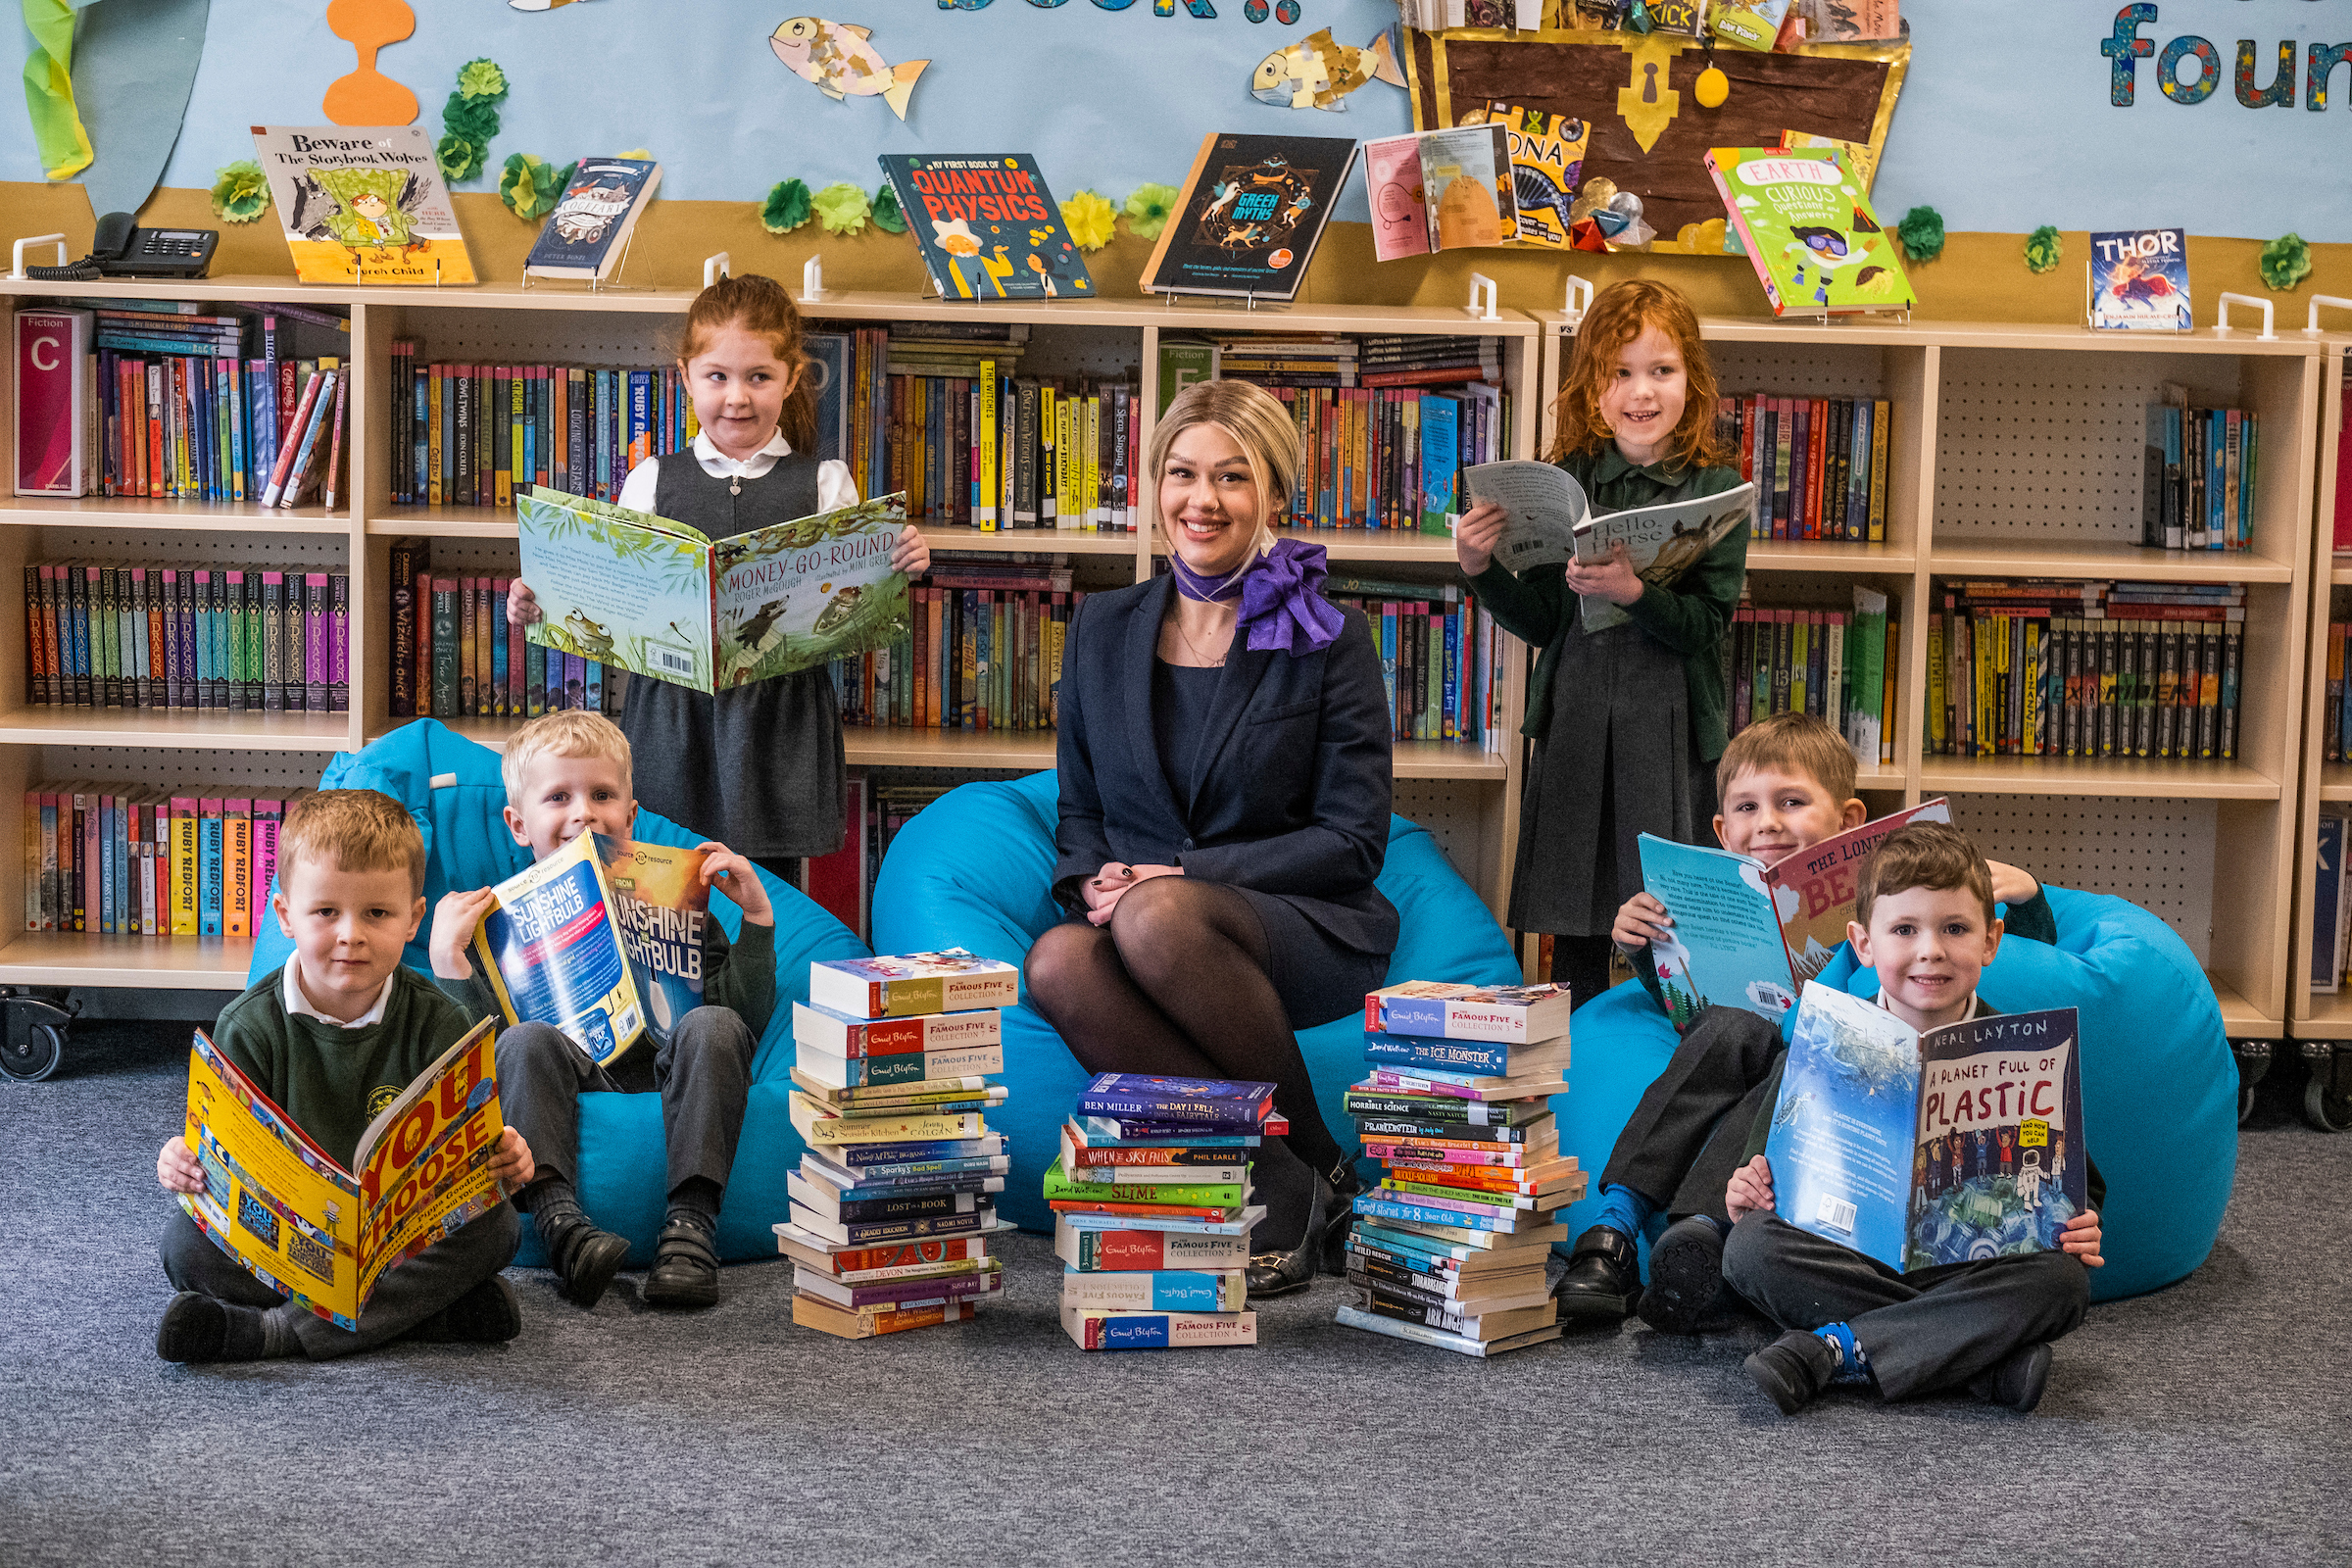 Taylor Wimpey marks World Book Day with donation to Letham Mains Primary School